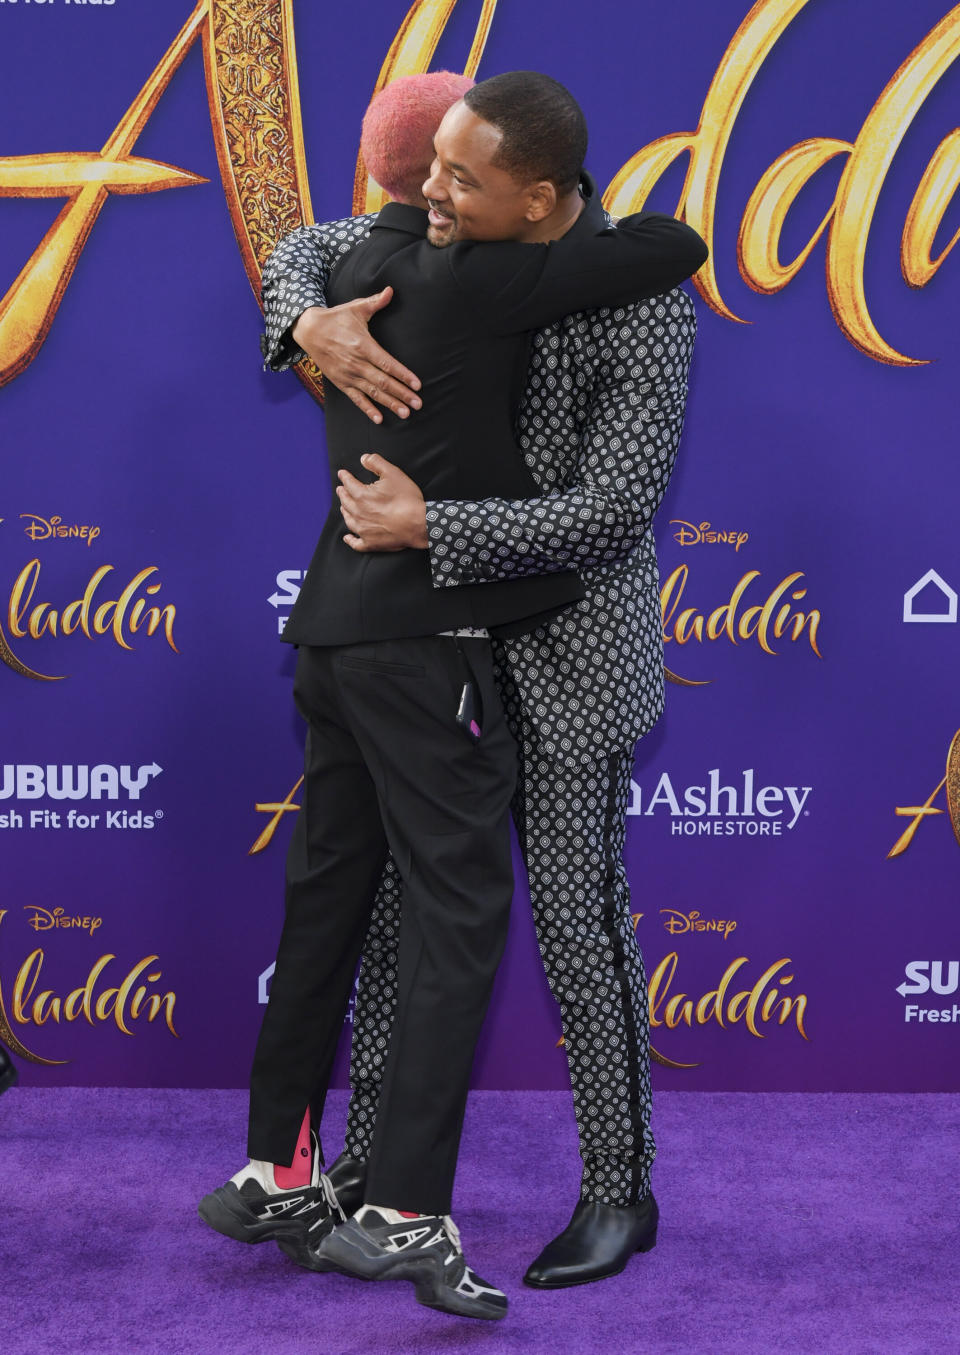 Will Smith hugging his son Jaden after he finally showed up. (Photo: Rodin Eckenroth via Getty Images)